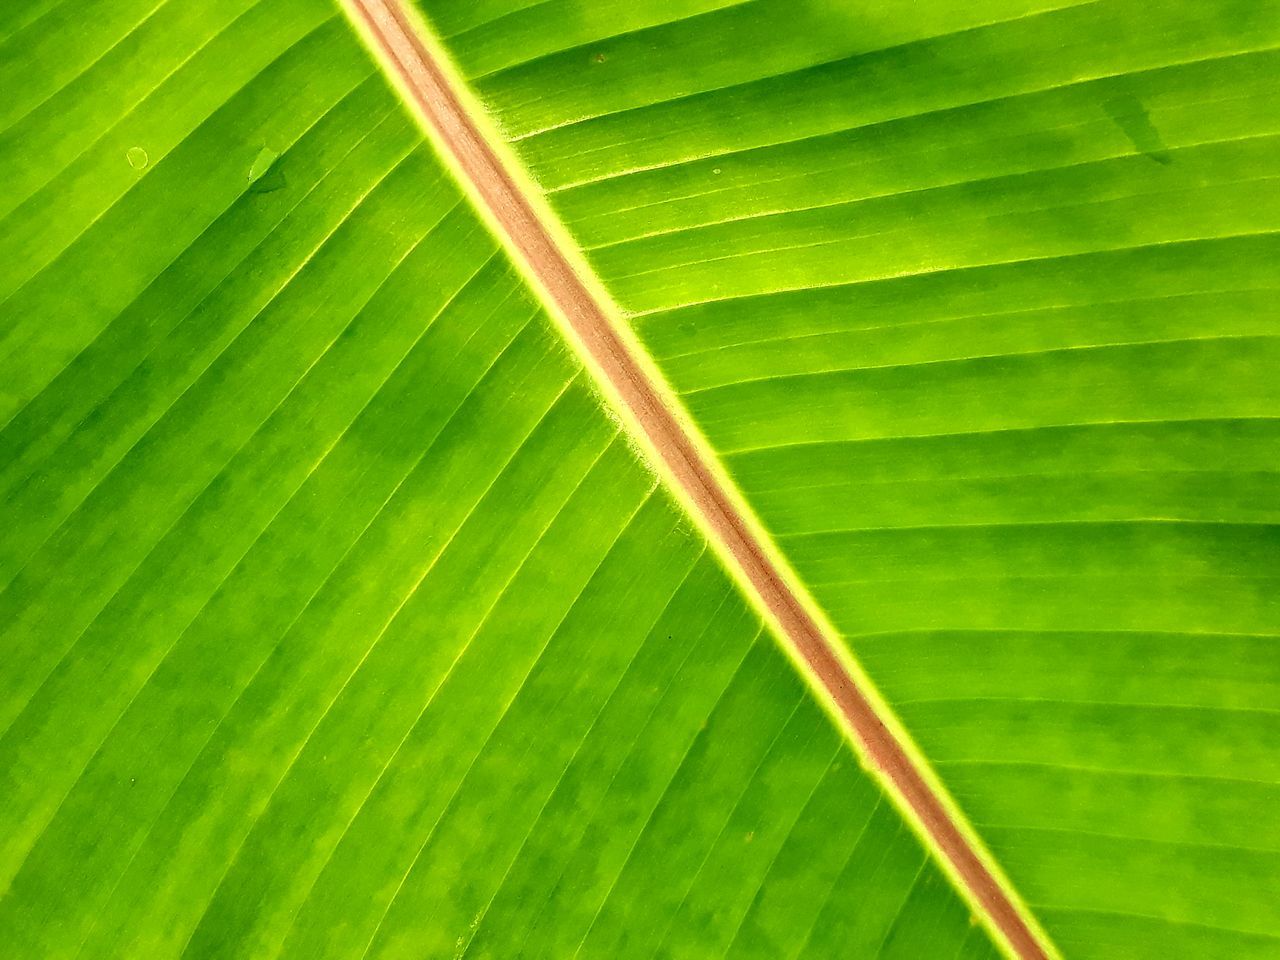 leaf, green, plant part, banana leaf, palm leaf, plant, close-up, palm tree, tropical climate, nature, no people, backgrounds, beauty in nature, pattern, full frame, leaf vein, growth, yellow, sunlight, tree, flower, frond, freshness, textured, environment, outdoors, line, grass, botany, striped, leaves, plant stem, macro, day